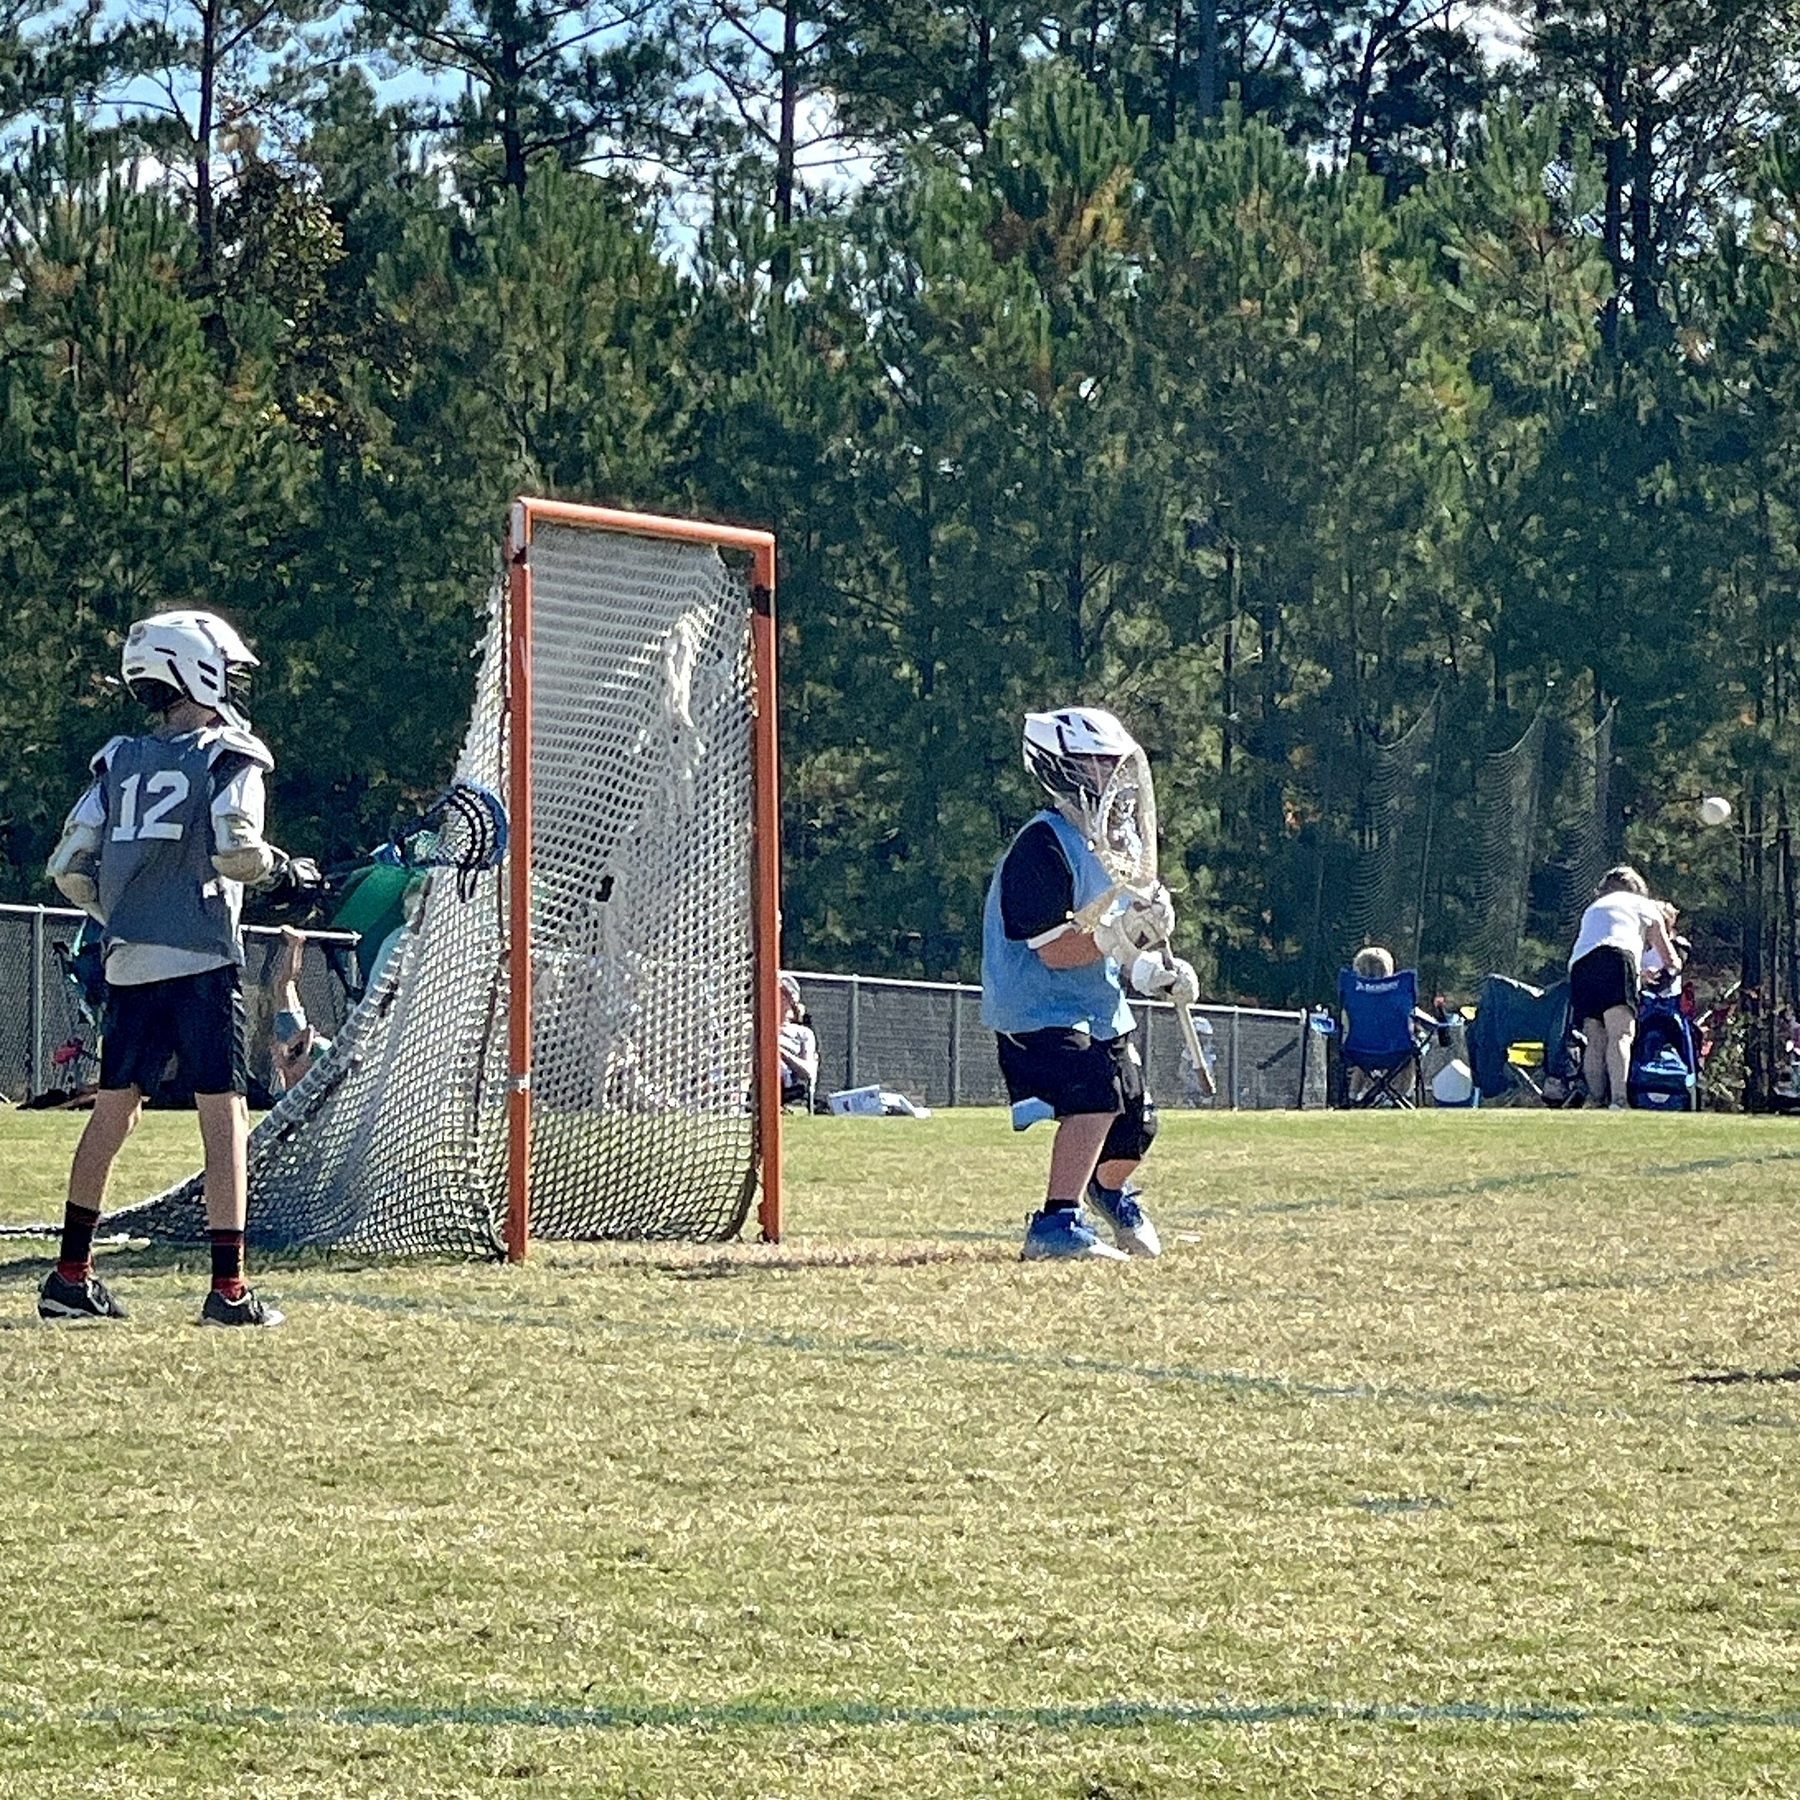 Lacrosse goalie about to make a save.